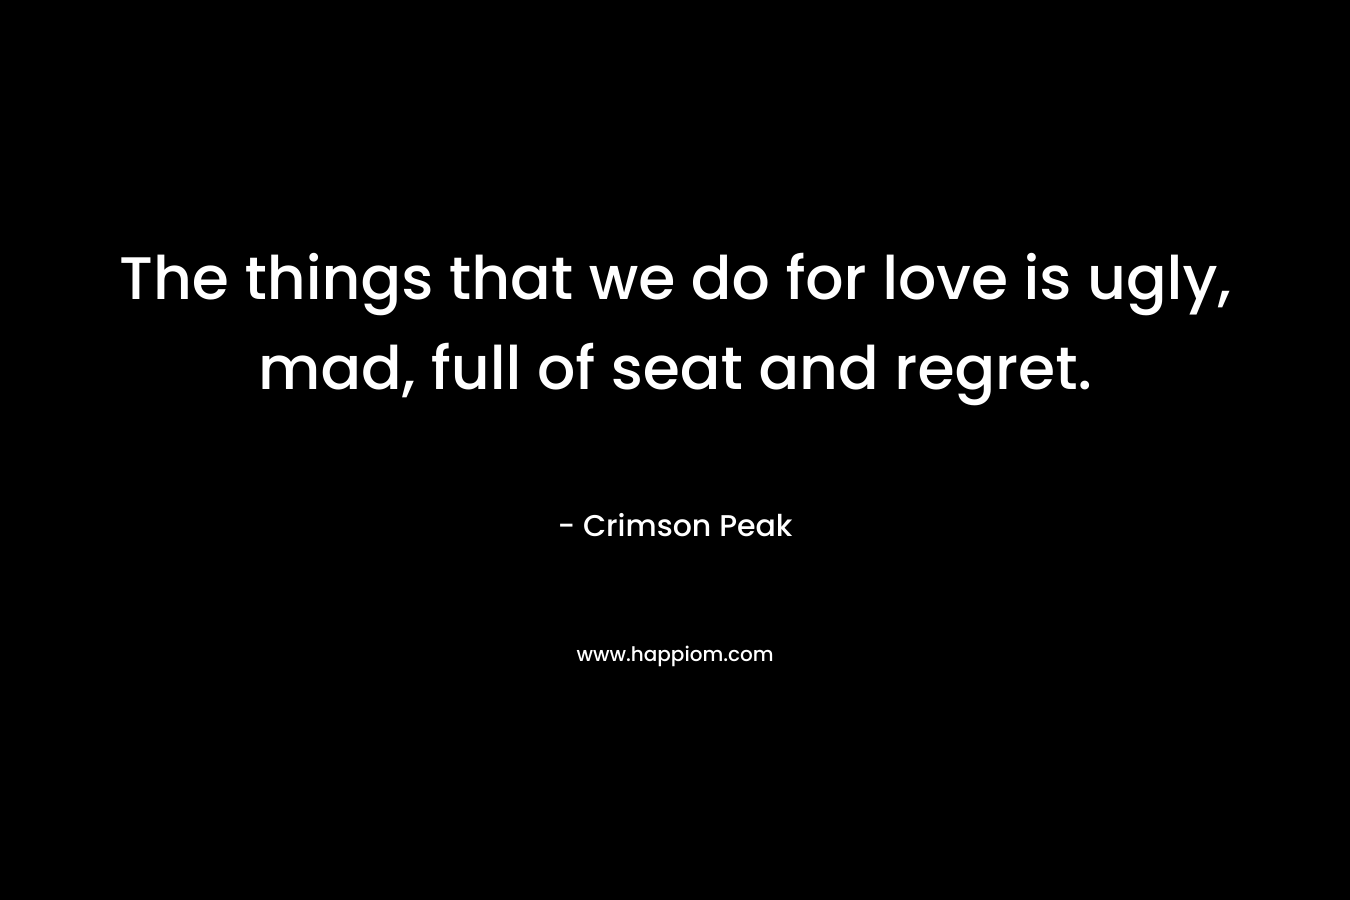 The things that we do for love is ugly, mad, full of seat and regret.